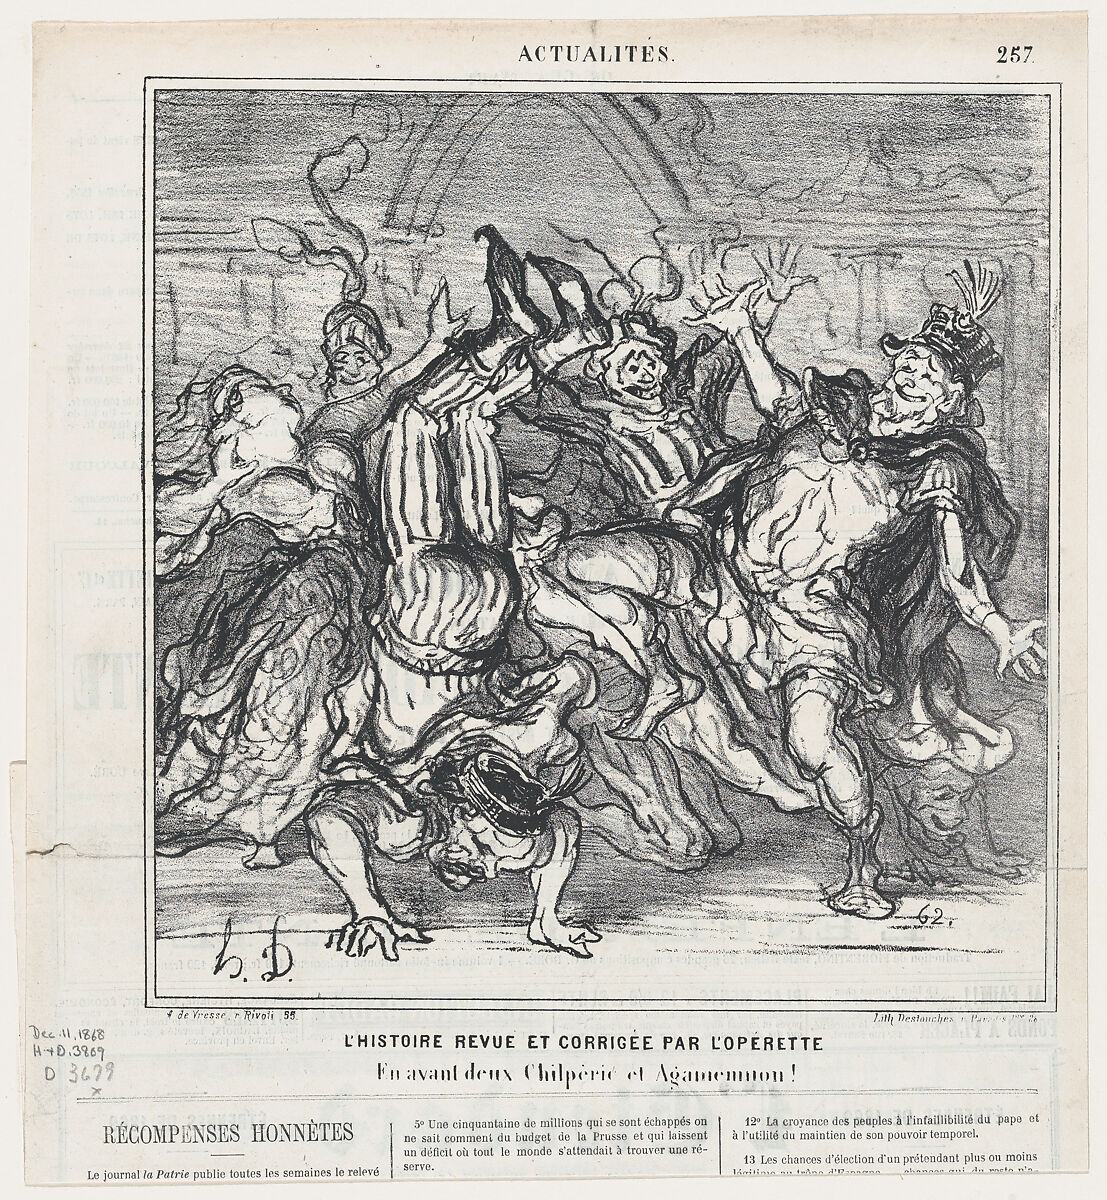 History revised and corrected by the operetta: Go ahead Chilperic and Agamemnon!, from 'News of the day,' published in Le Charivari, December 11, 1868, Honoré Daumier (French, Marseilles 1808–1879 Valmondois), Lithograph on newsprint; second state of two (Delteil) 